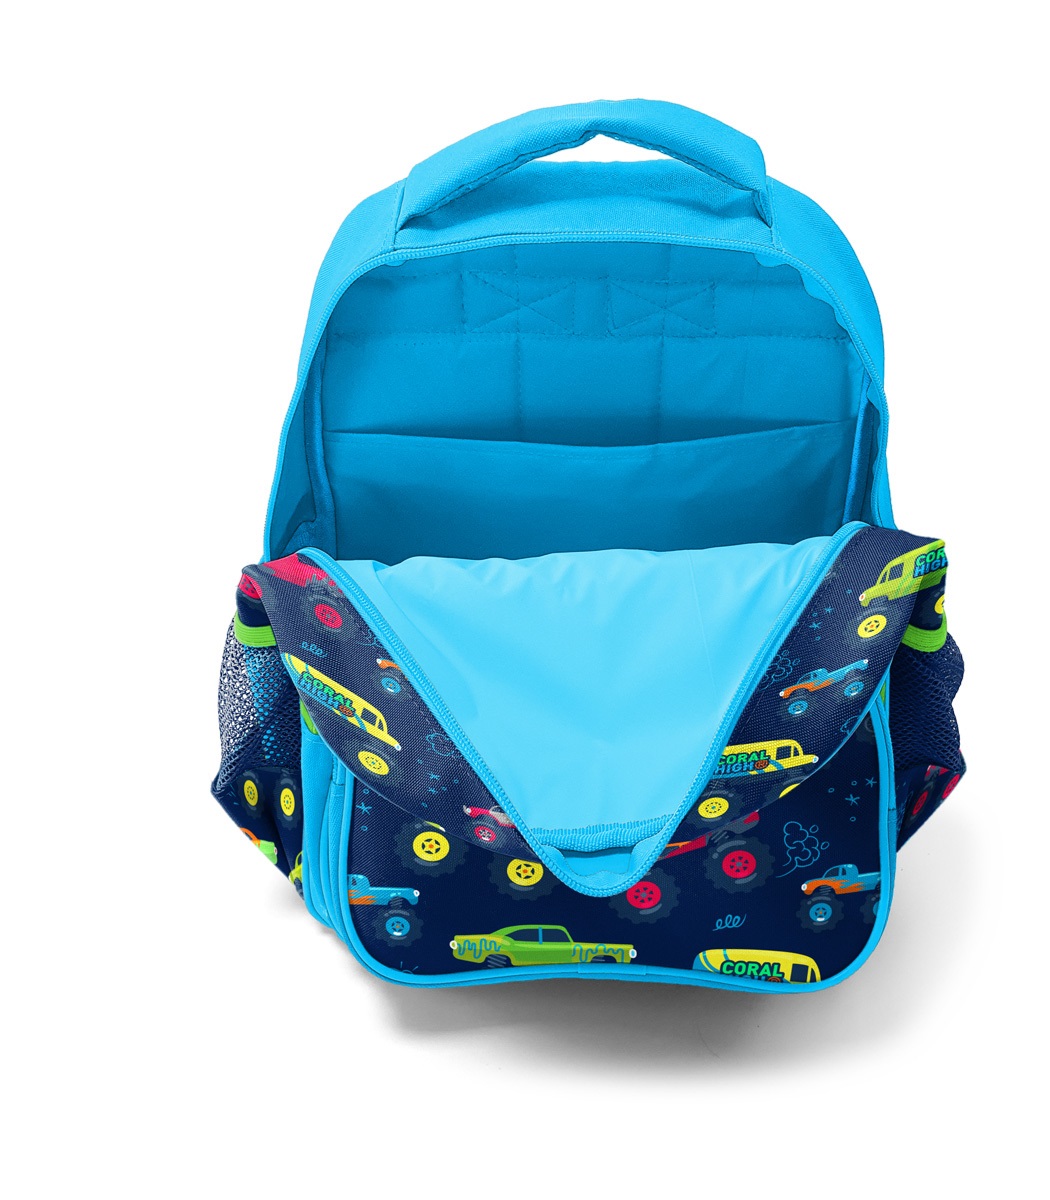 Coral High Kids Three Compartment School Backpack - Blue Navy Monster Truck Patterned